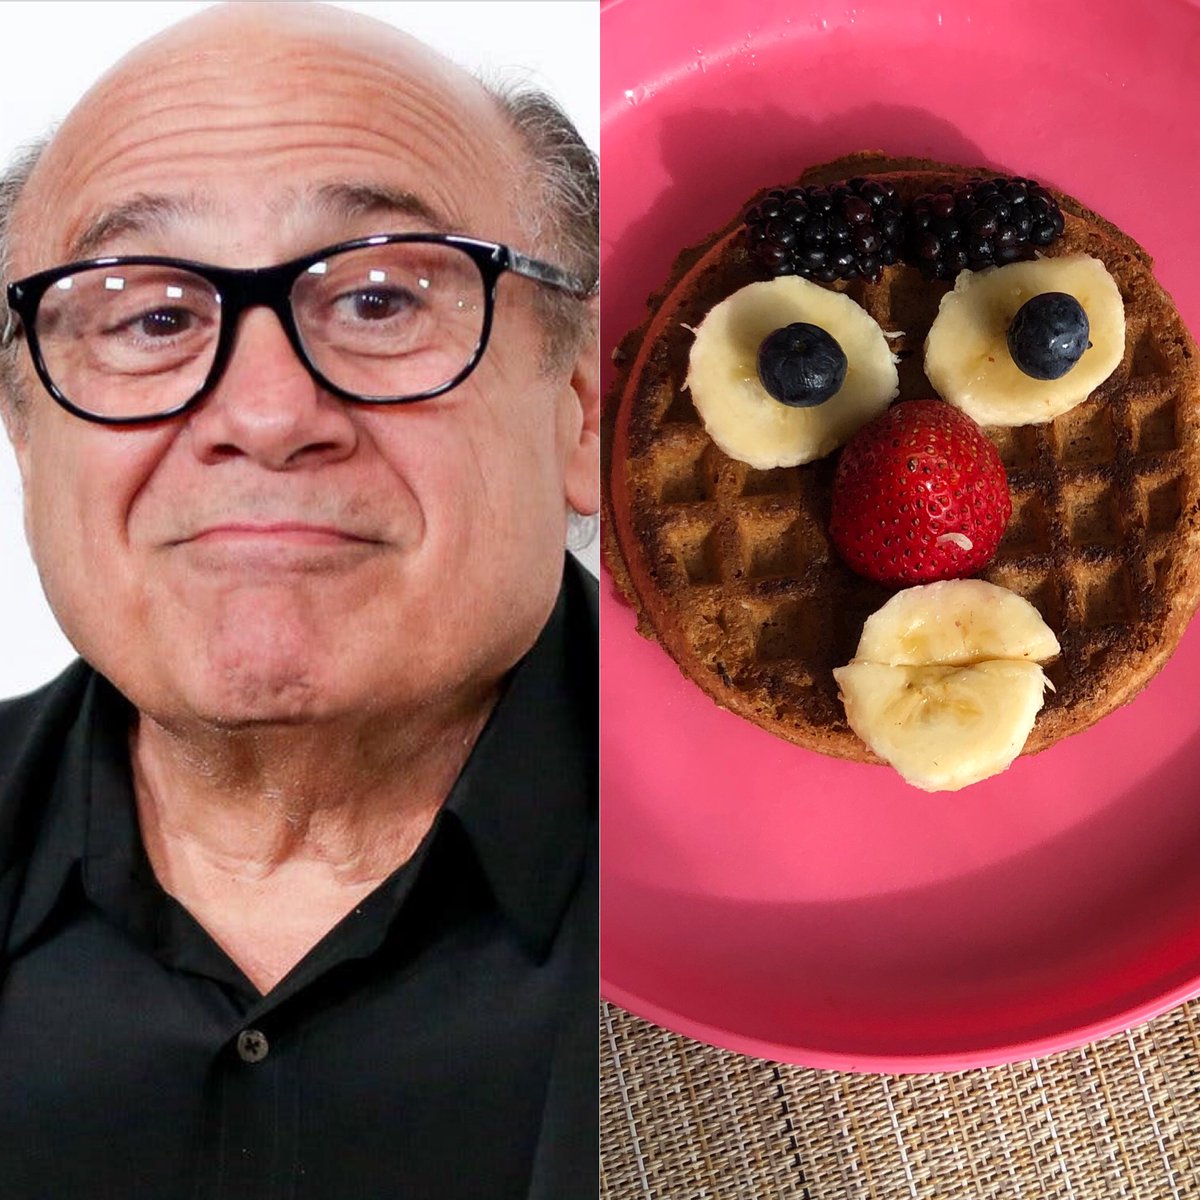 Here's a toaster waffle  @DannyDeVito cause that dude just Fk'n rocks!